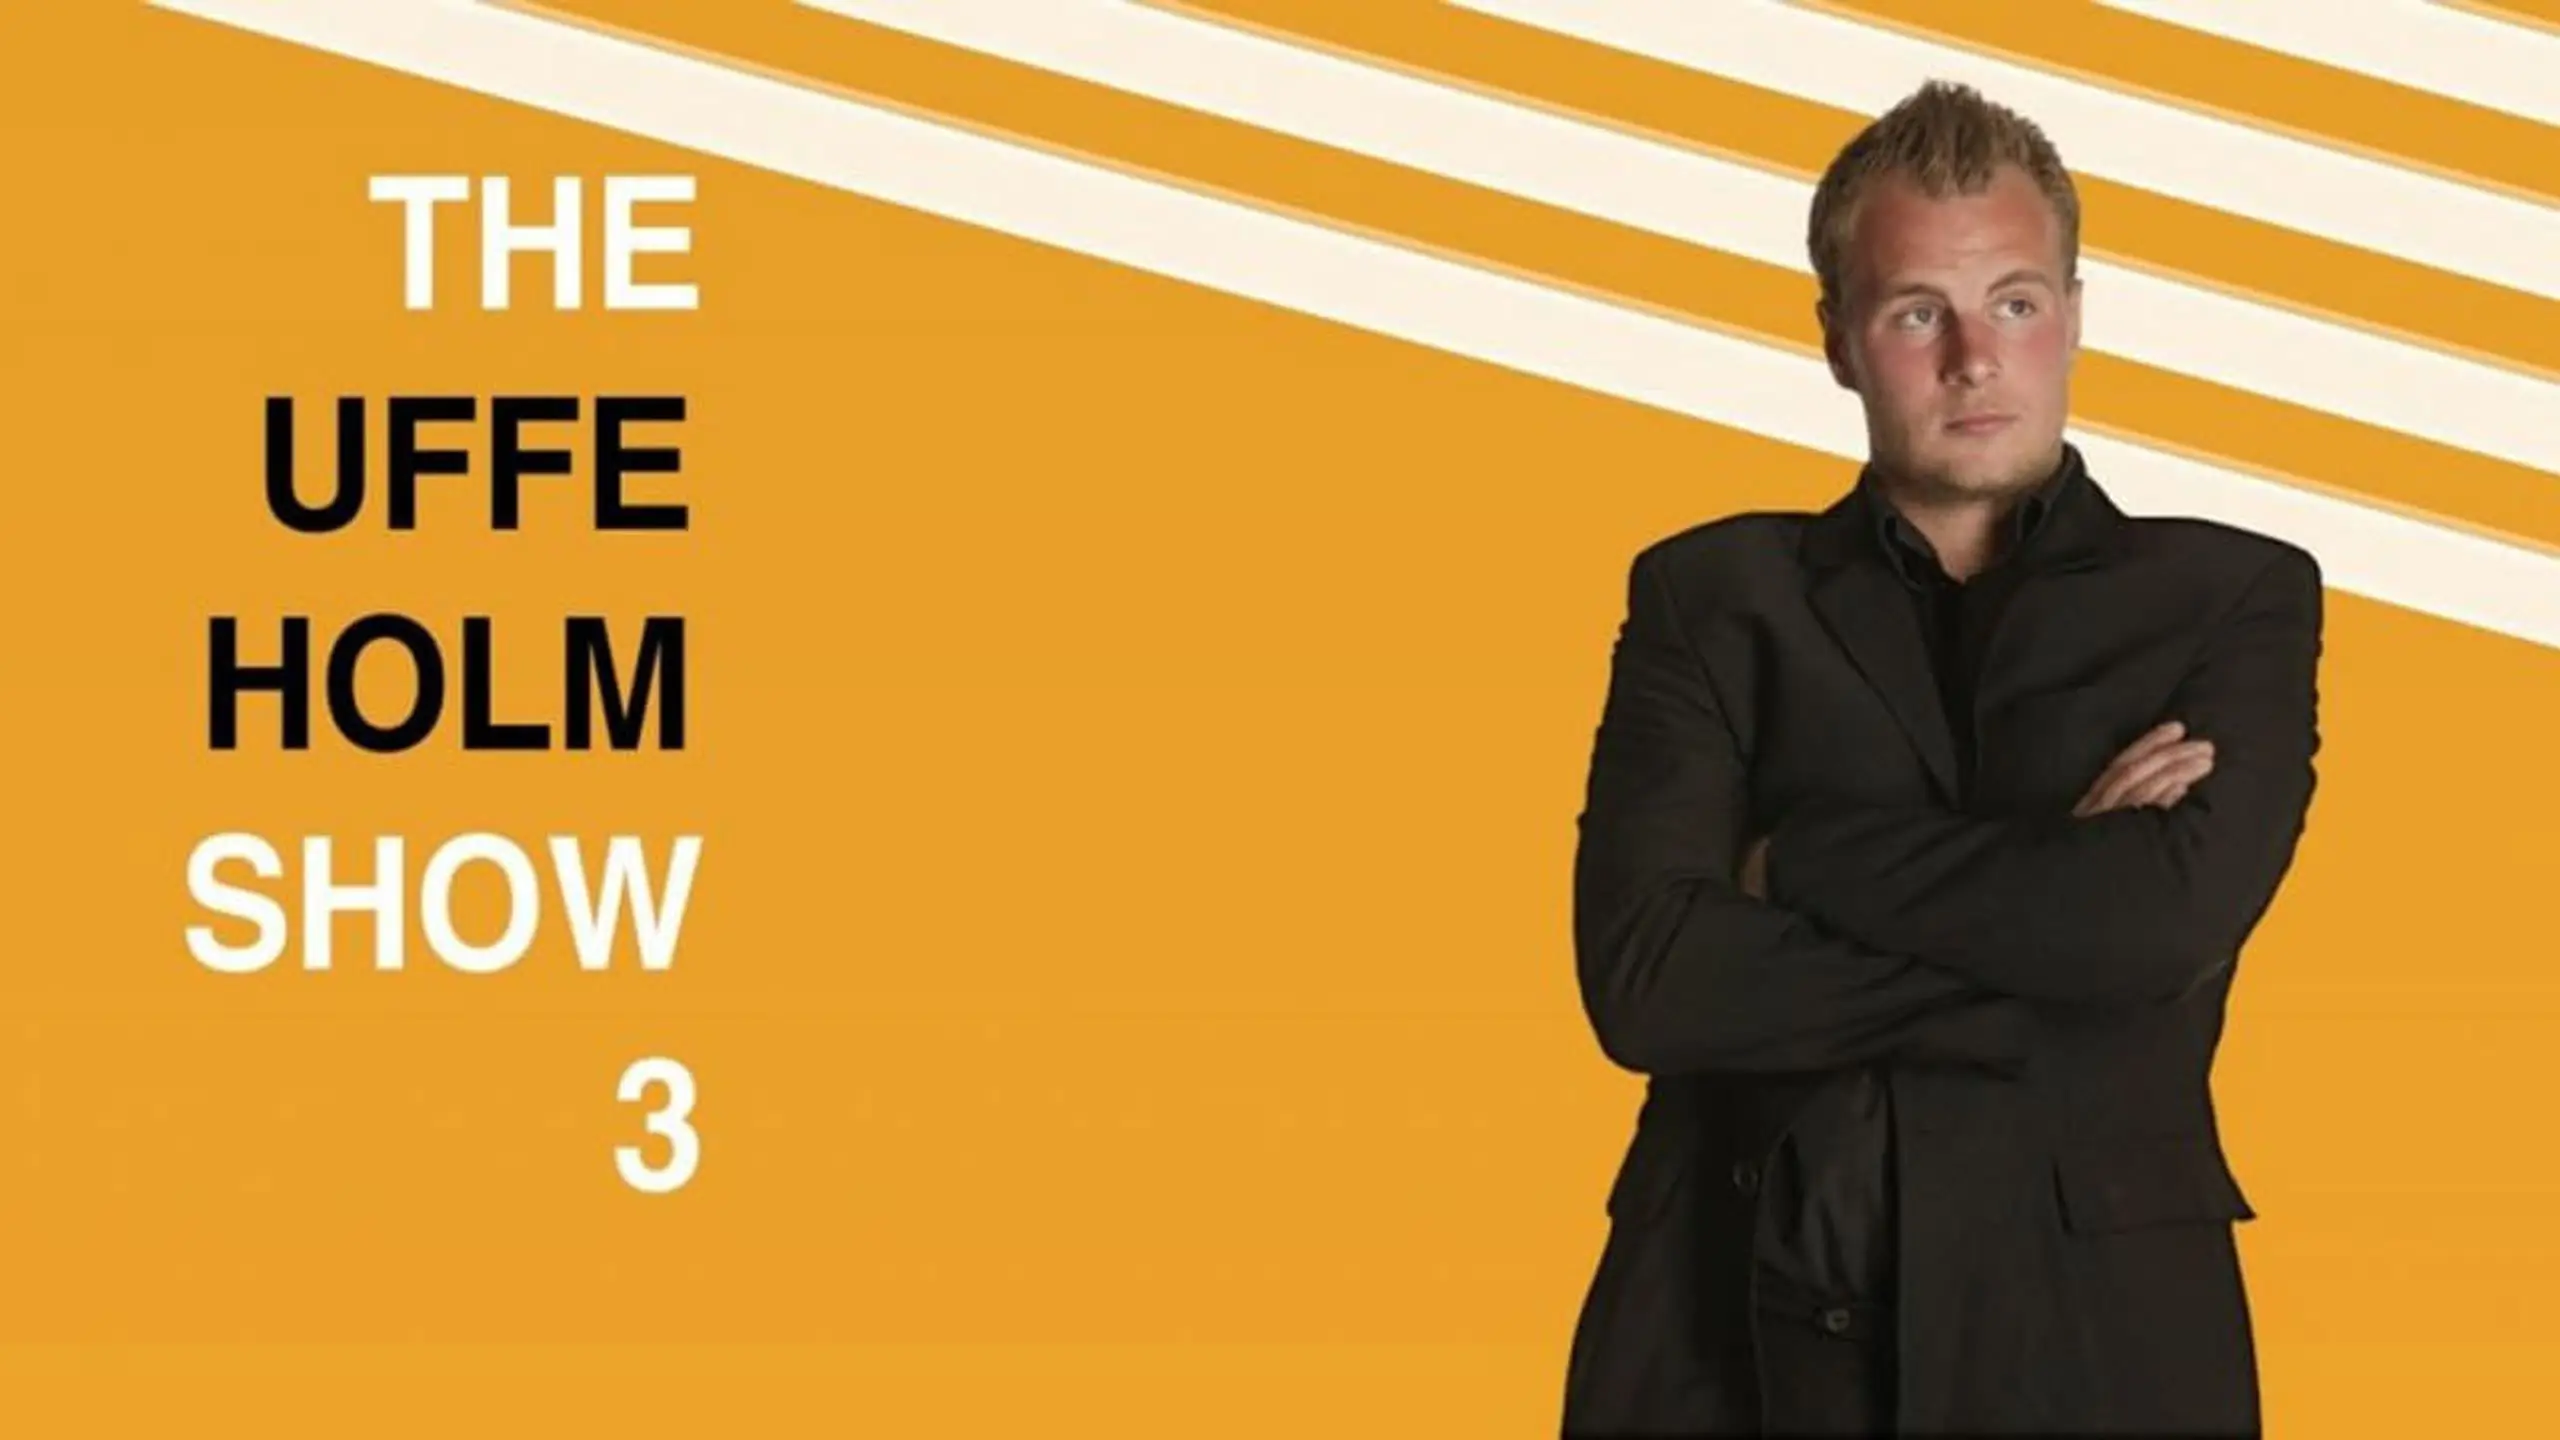 The Uffe Holm Show 3